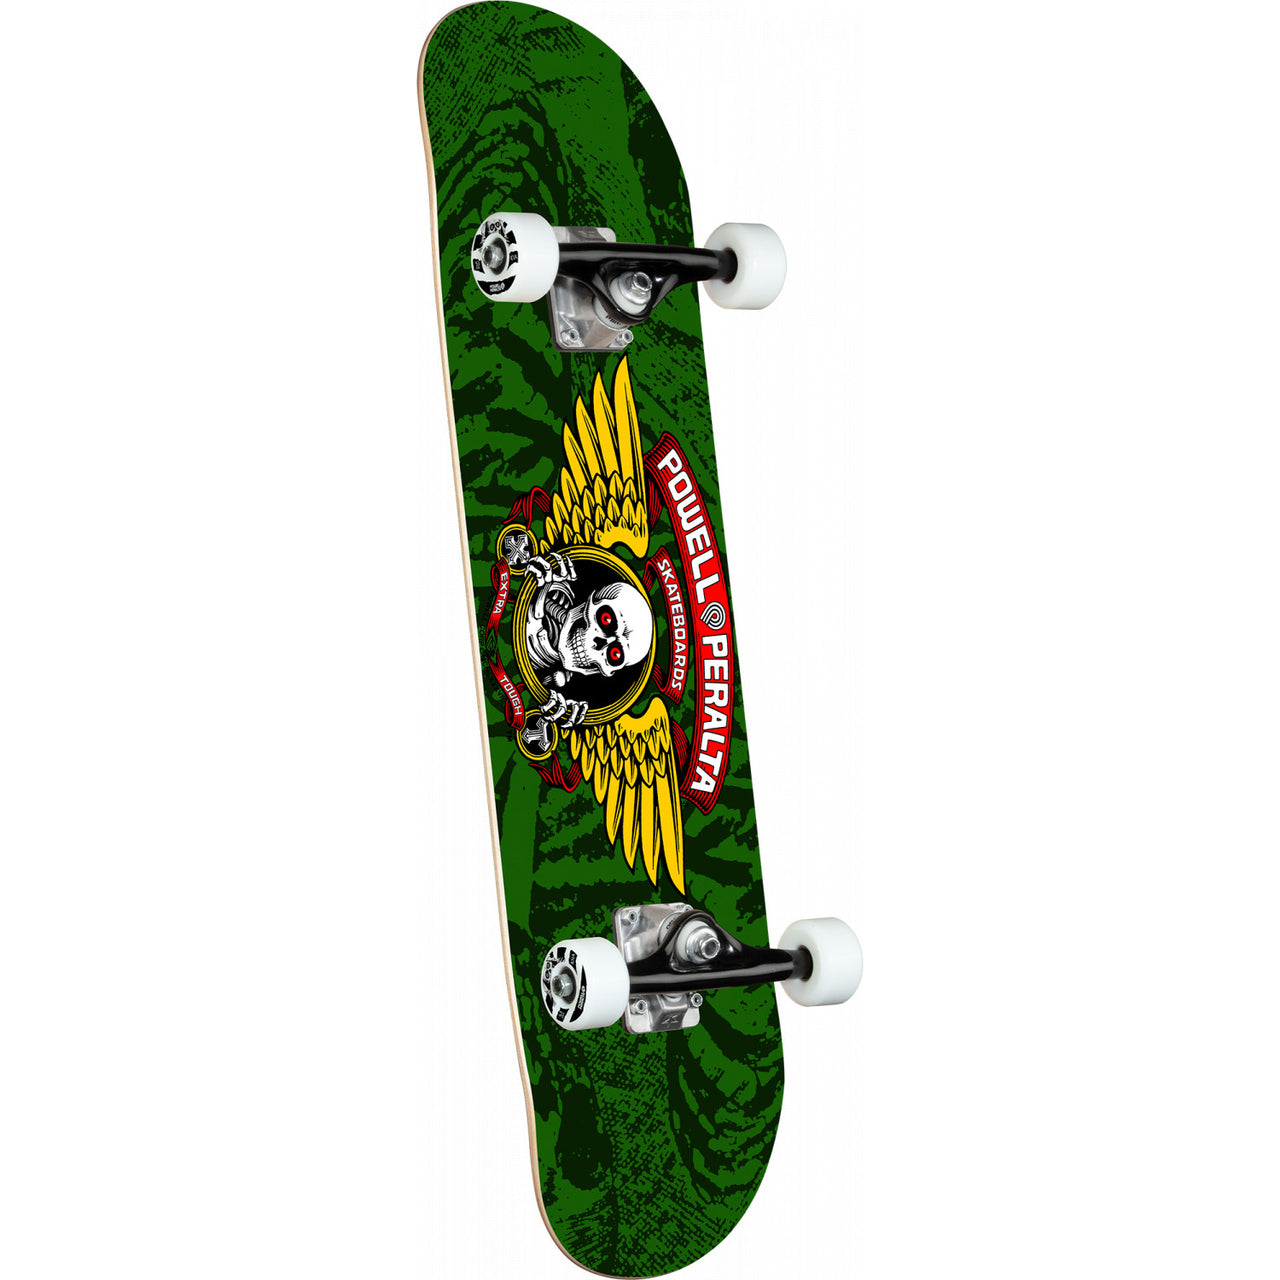 POWELL-PERALTA - WINGED RIPPER COMPLETE - GREEN - 8.0